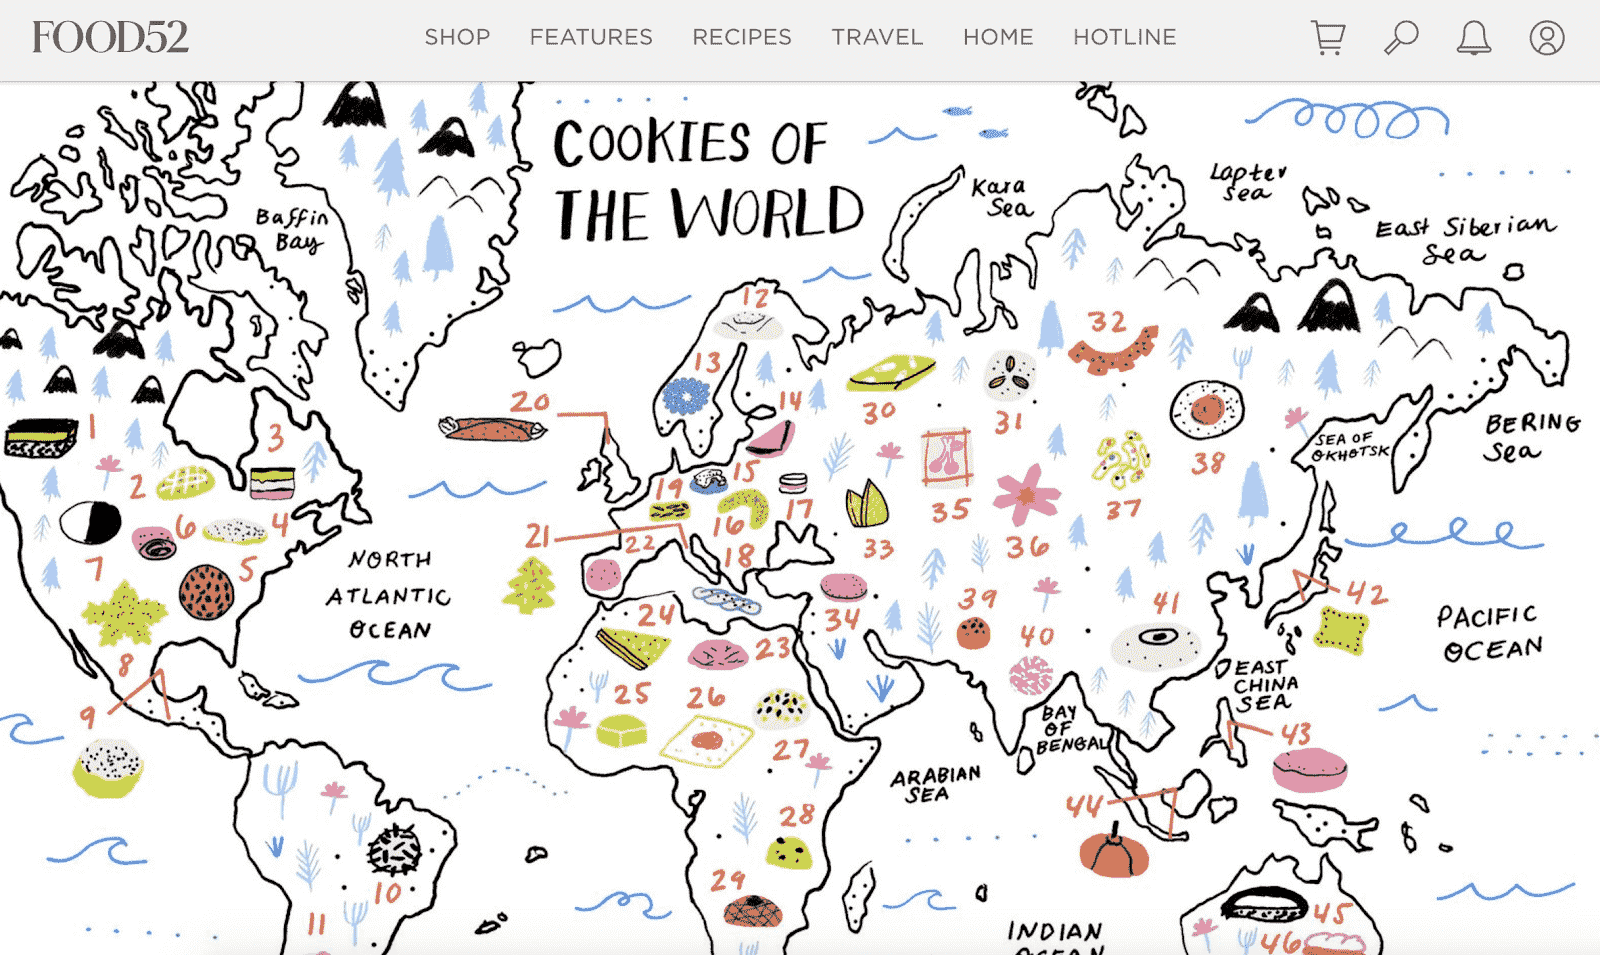 Food52 - Cookies of the World